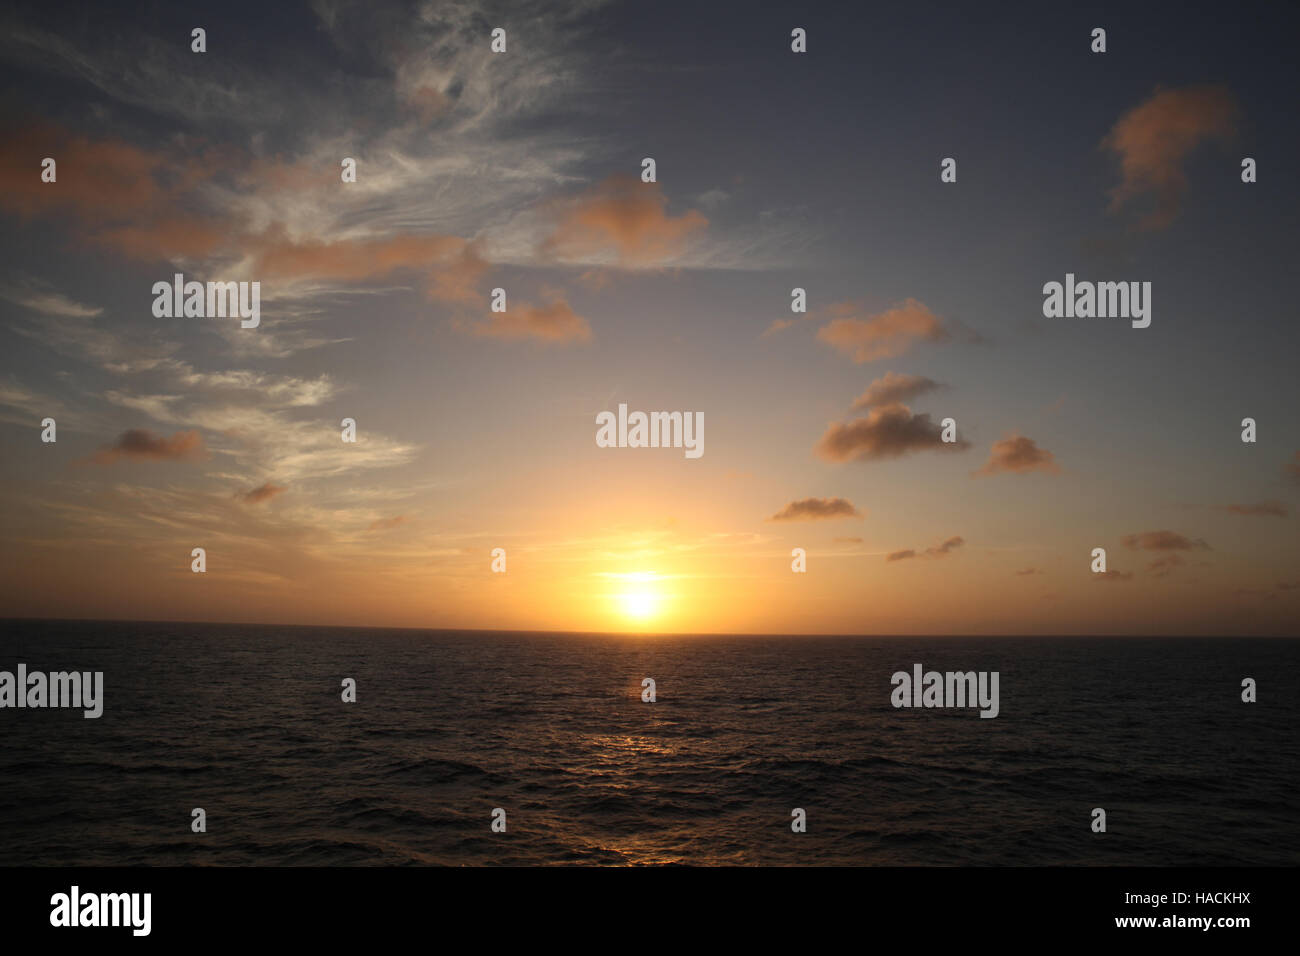 Sunset over the Ocean, off the coast of the Mexico, Caribbean. Stock Photo